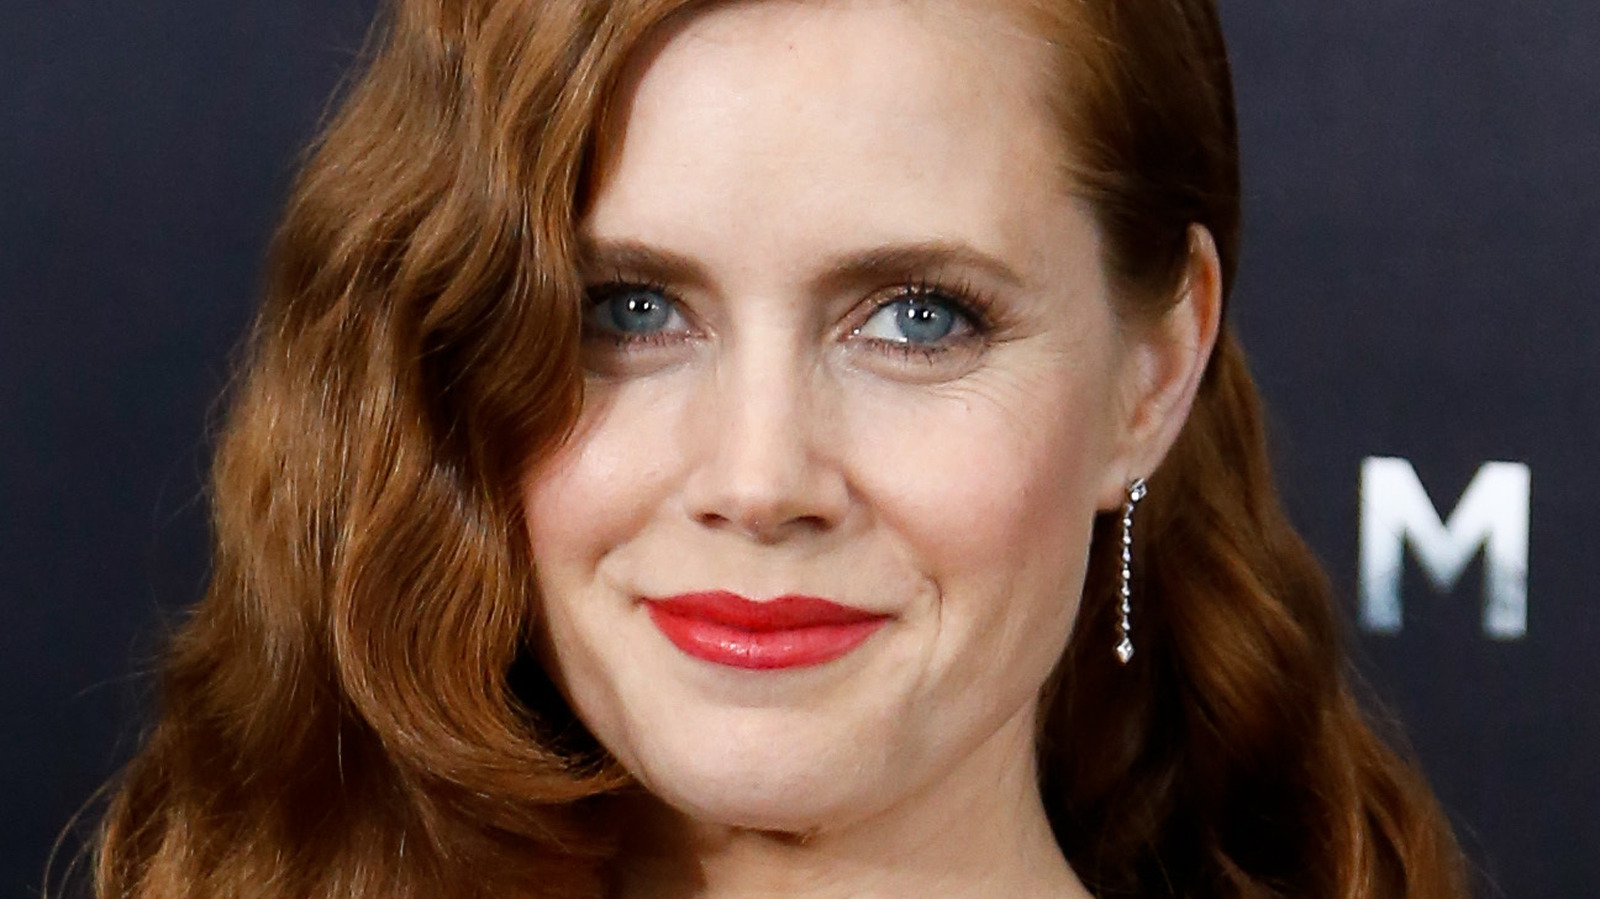 Lois Lane's A Redhead In Snyder's MAN OF STEEL! So What?